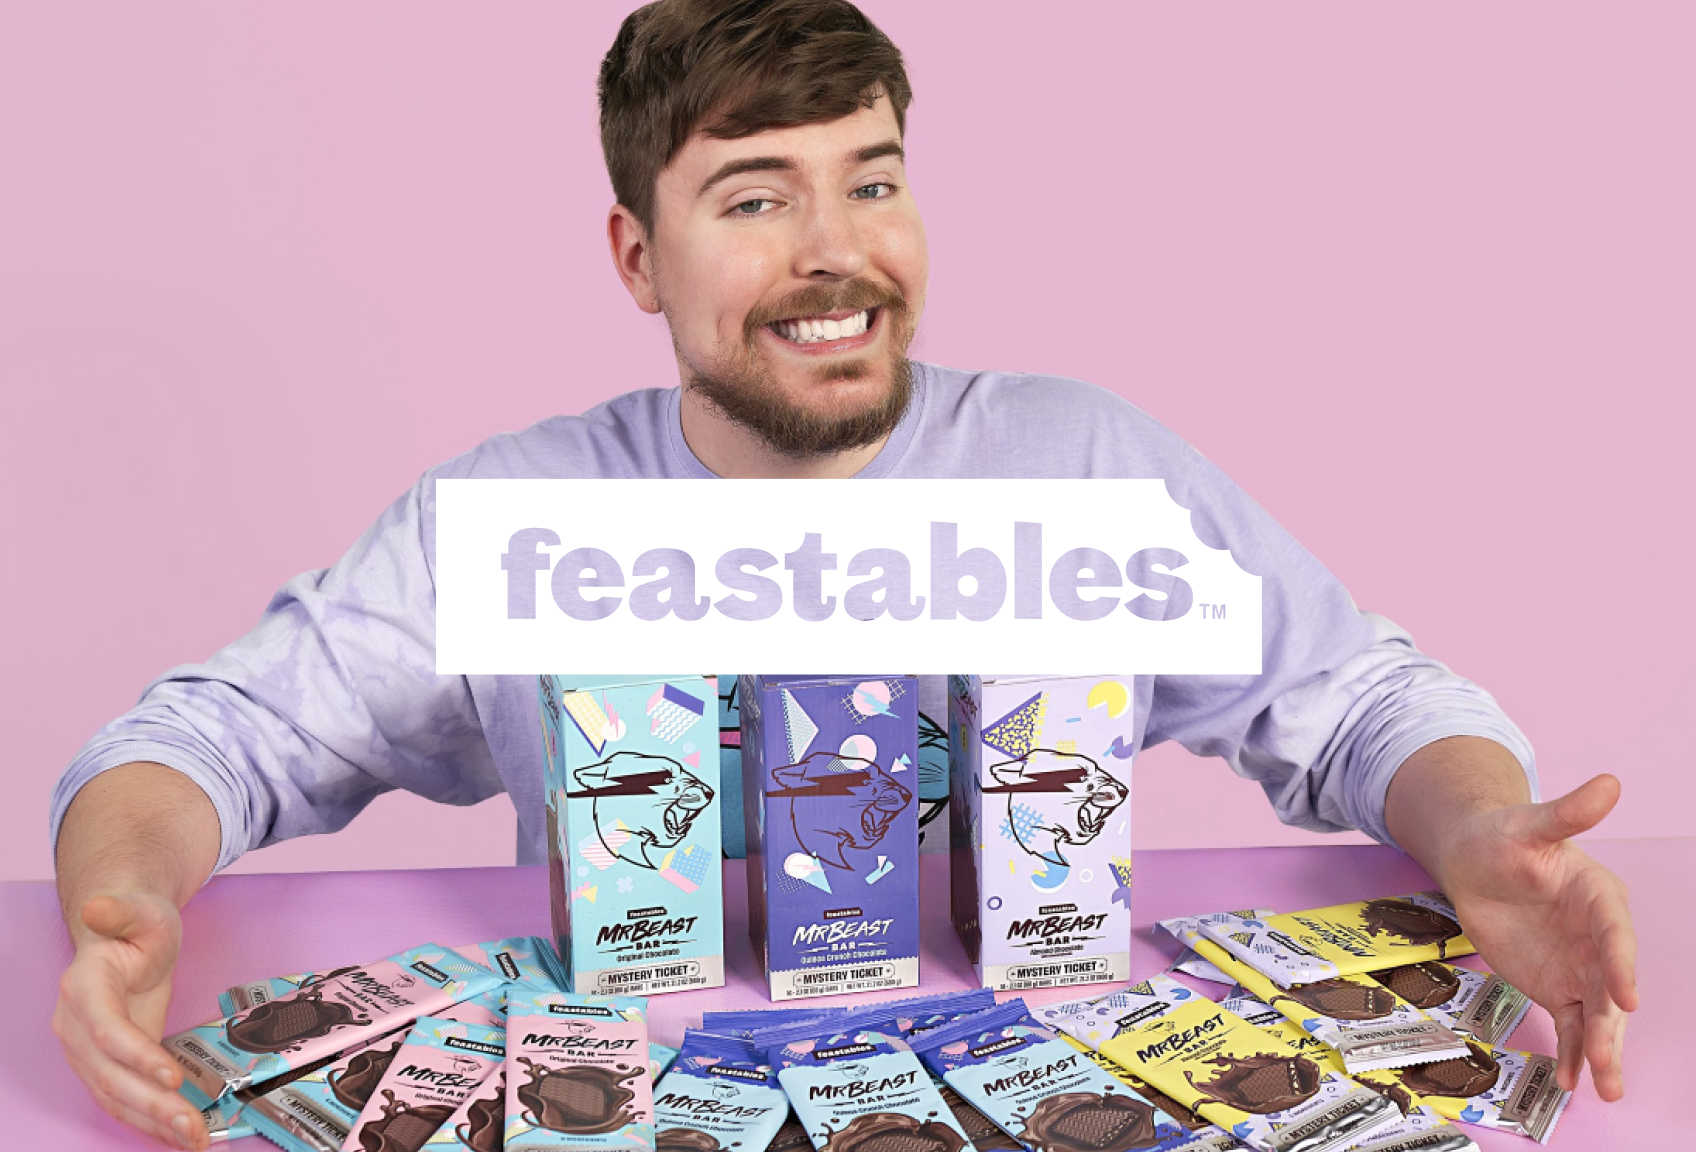 Marketing image from MrBeast's Feastables with MrBeast and a lot of chocolate bars. The logo for Feastables is over the top.